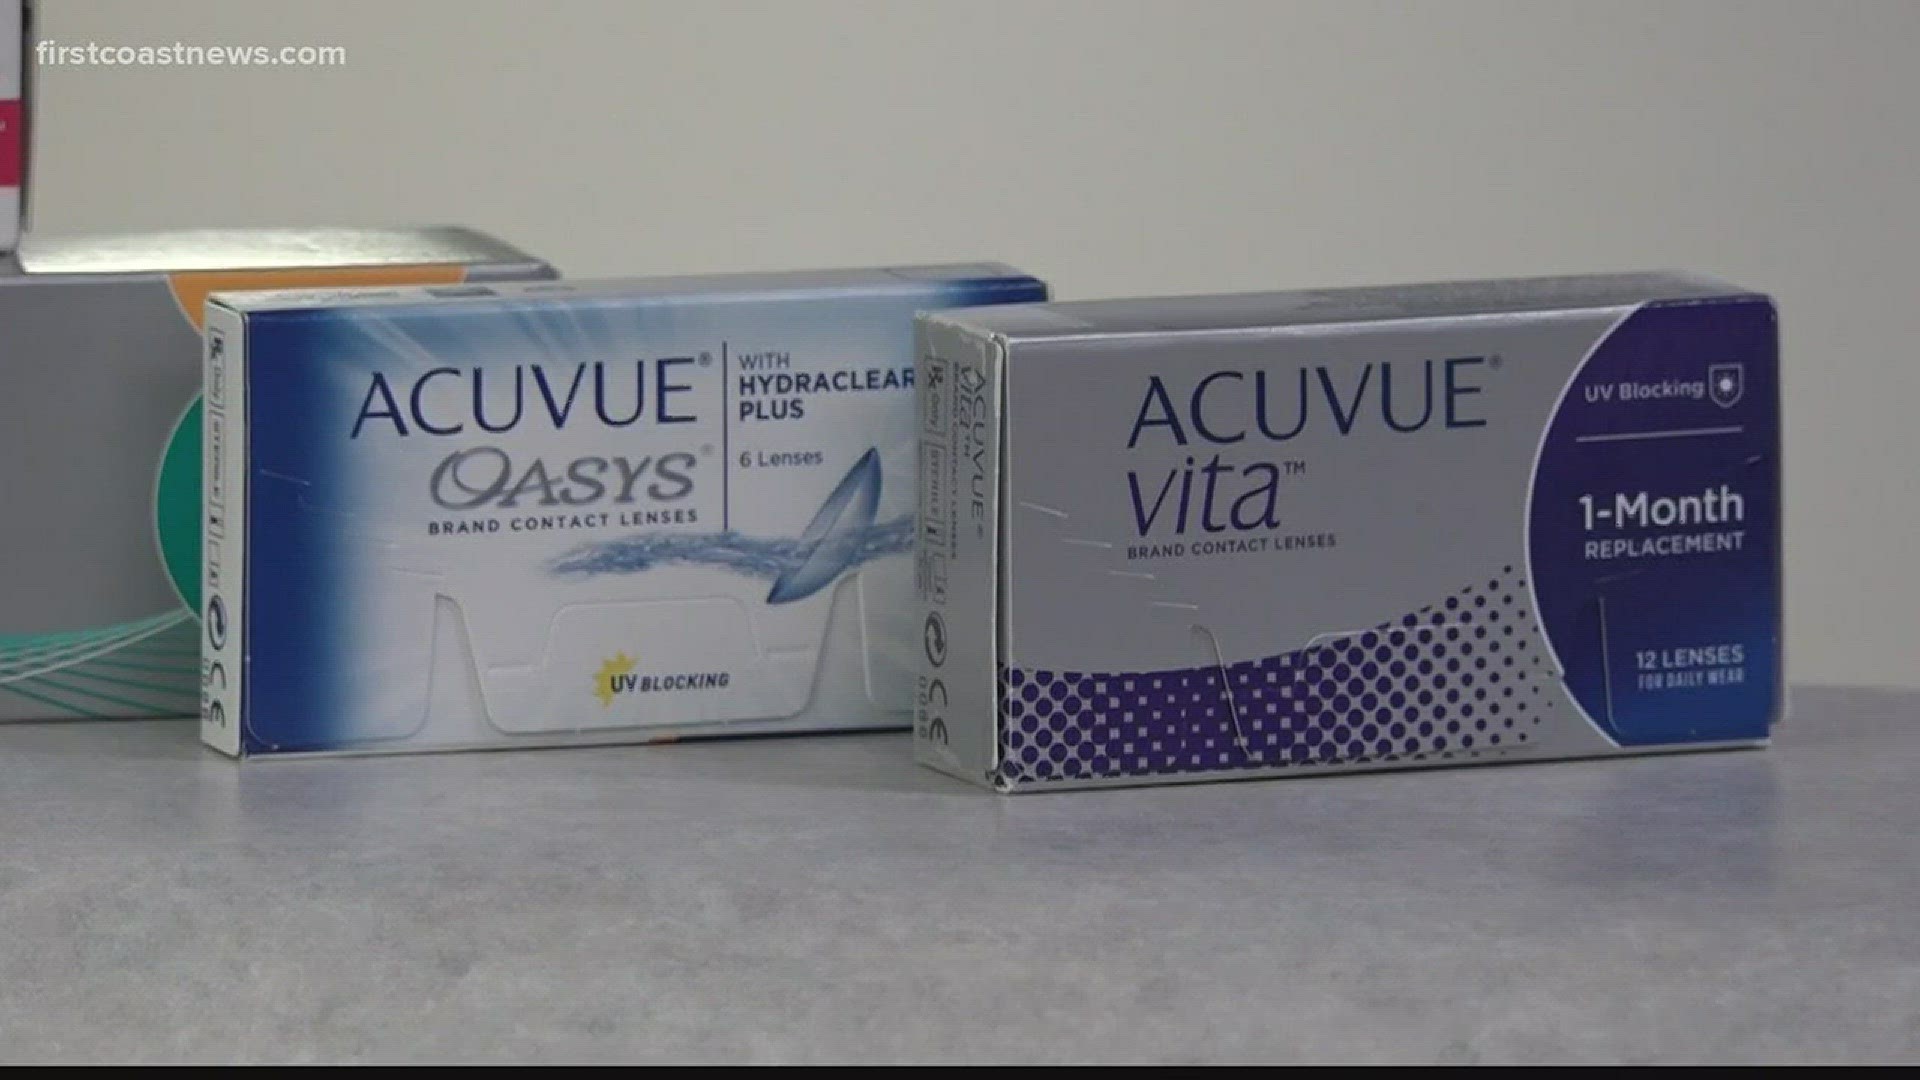 Made in Jax: Acuvue contact lenses